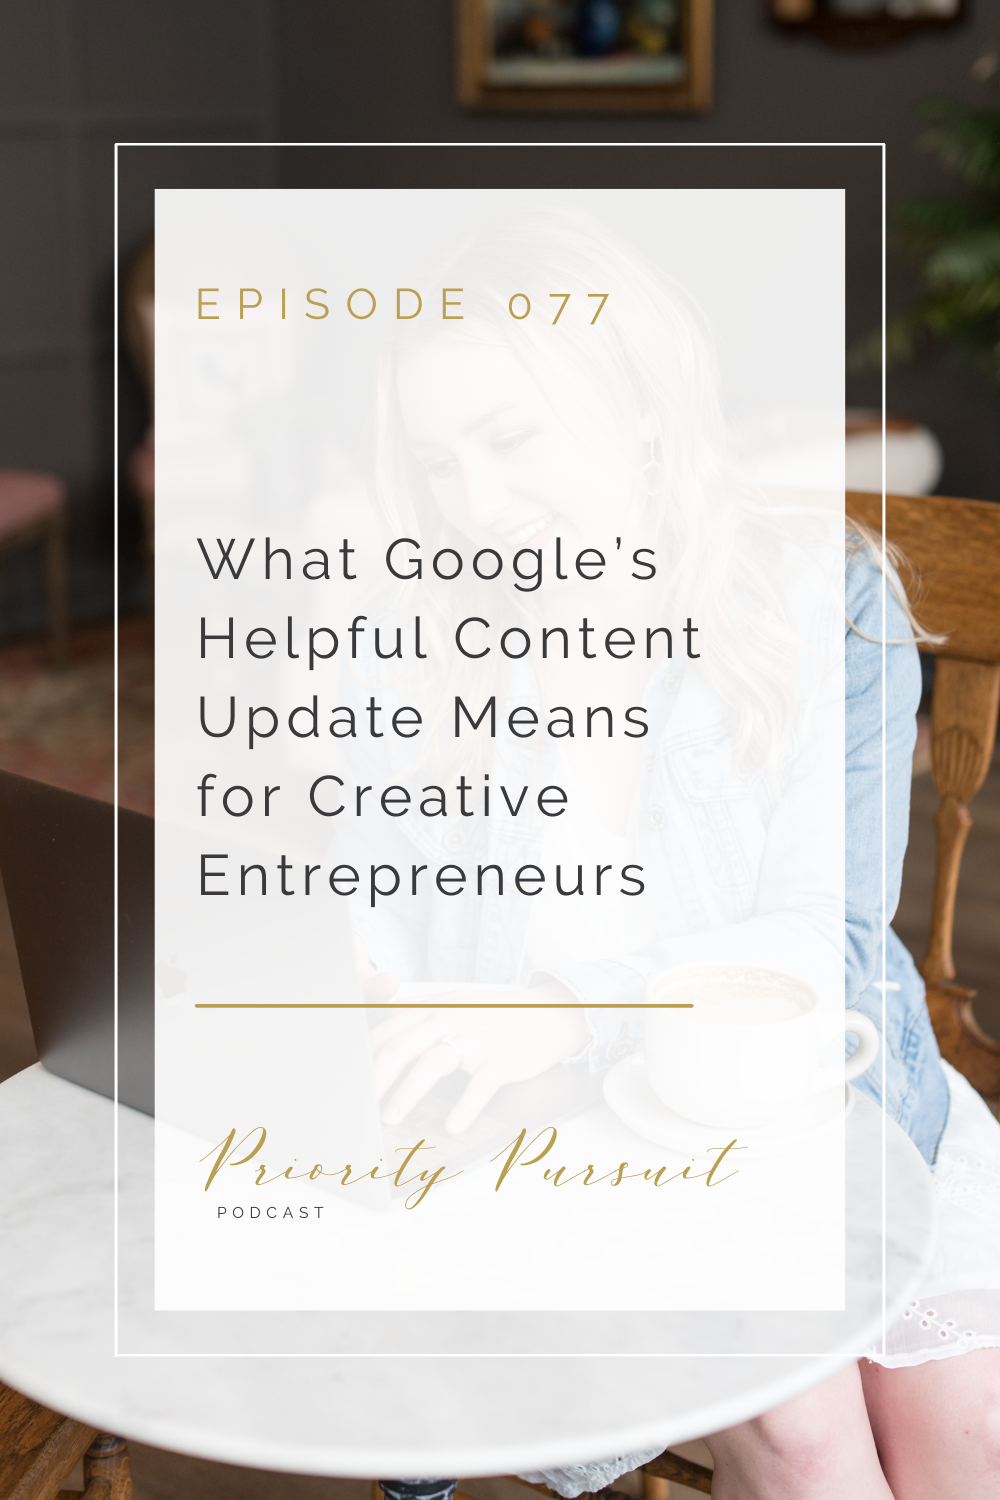 Victoria Rayburn explains what Google’s helpful content update means for creative entrepreneurs in this episode of “Priority Pursuit.” 